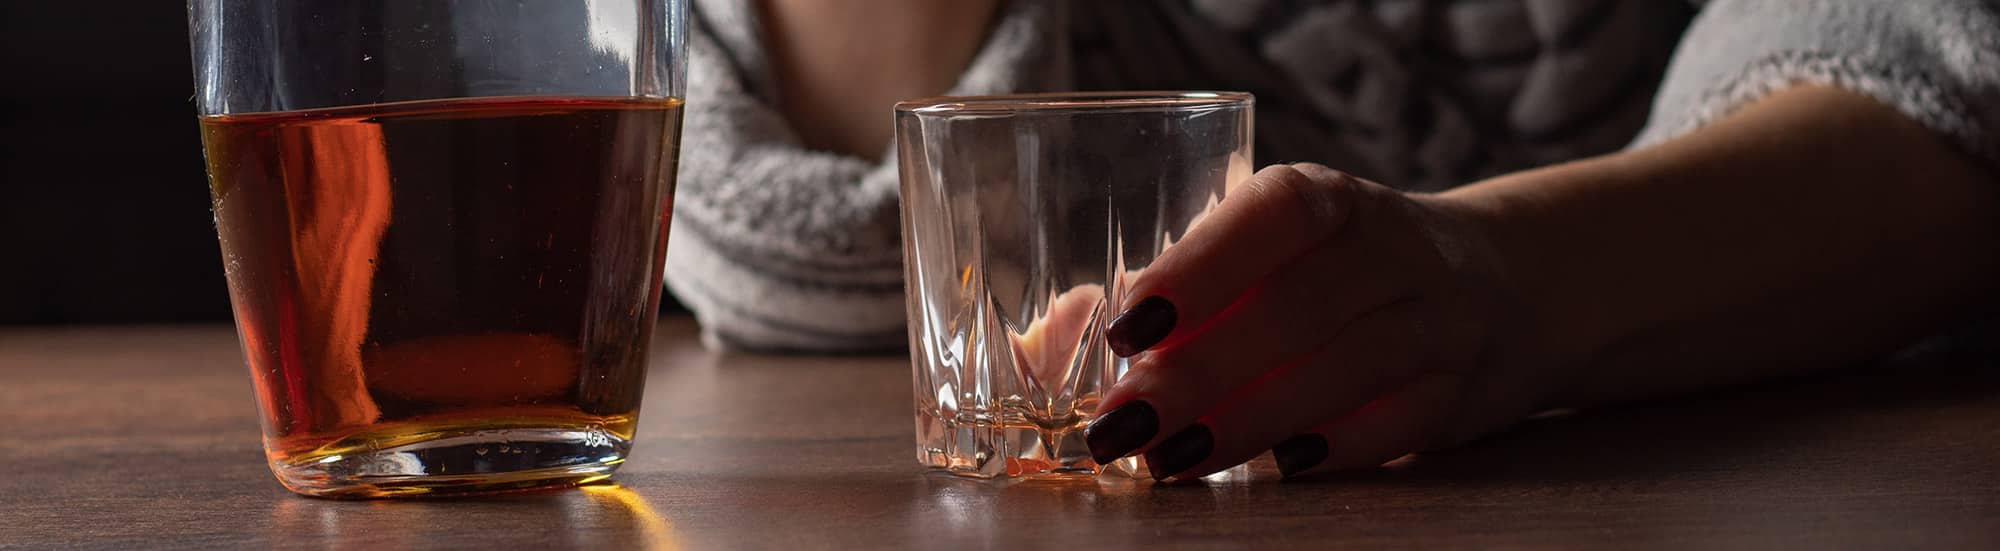 Woman's hand with painted fingernails holding empty whiskey glass near whiskey bottle 